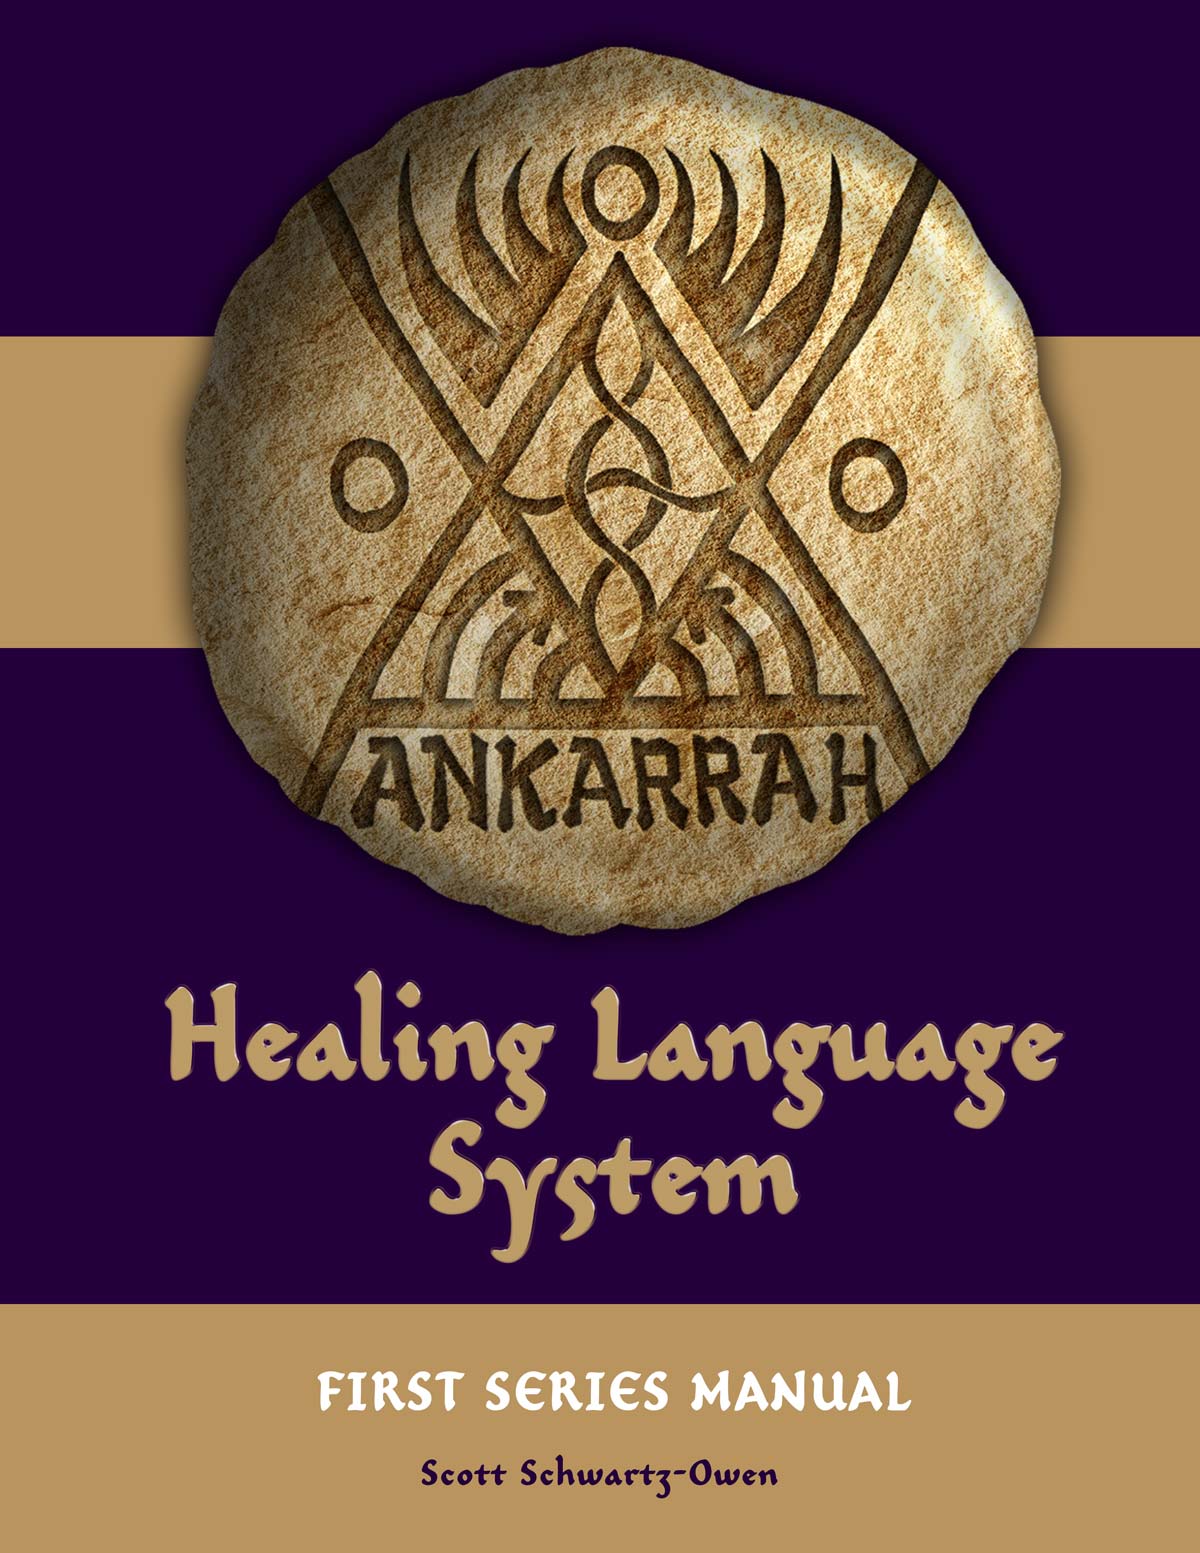 image of the Ankarrah First Series Manual cover